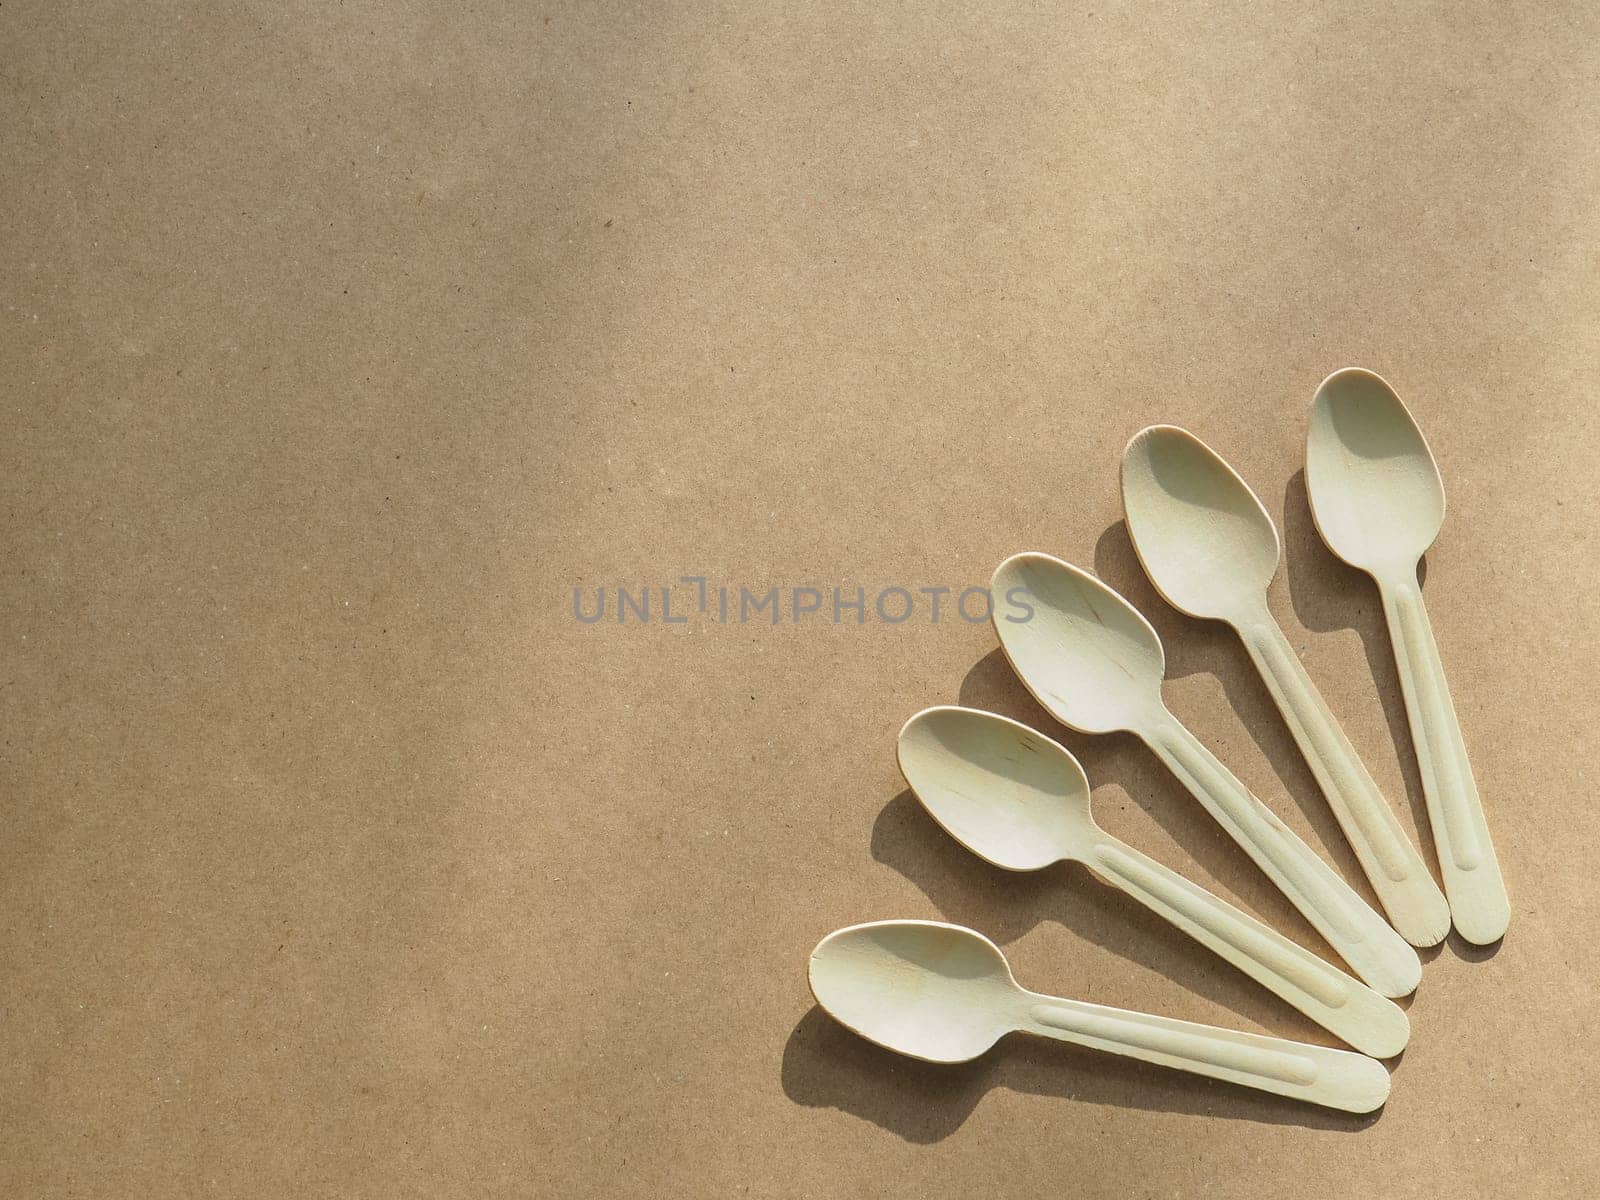 Ecology, zero waste. Wooden, biodegradable fiver forks. Concept of environment preservation and protection. Eco friendly disposable kitchenware utensils on craft paper background. Top view. Copy space